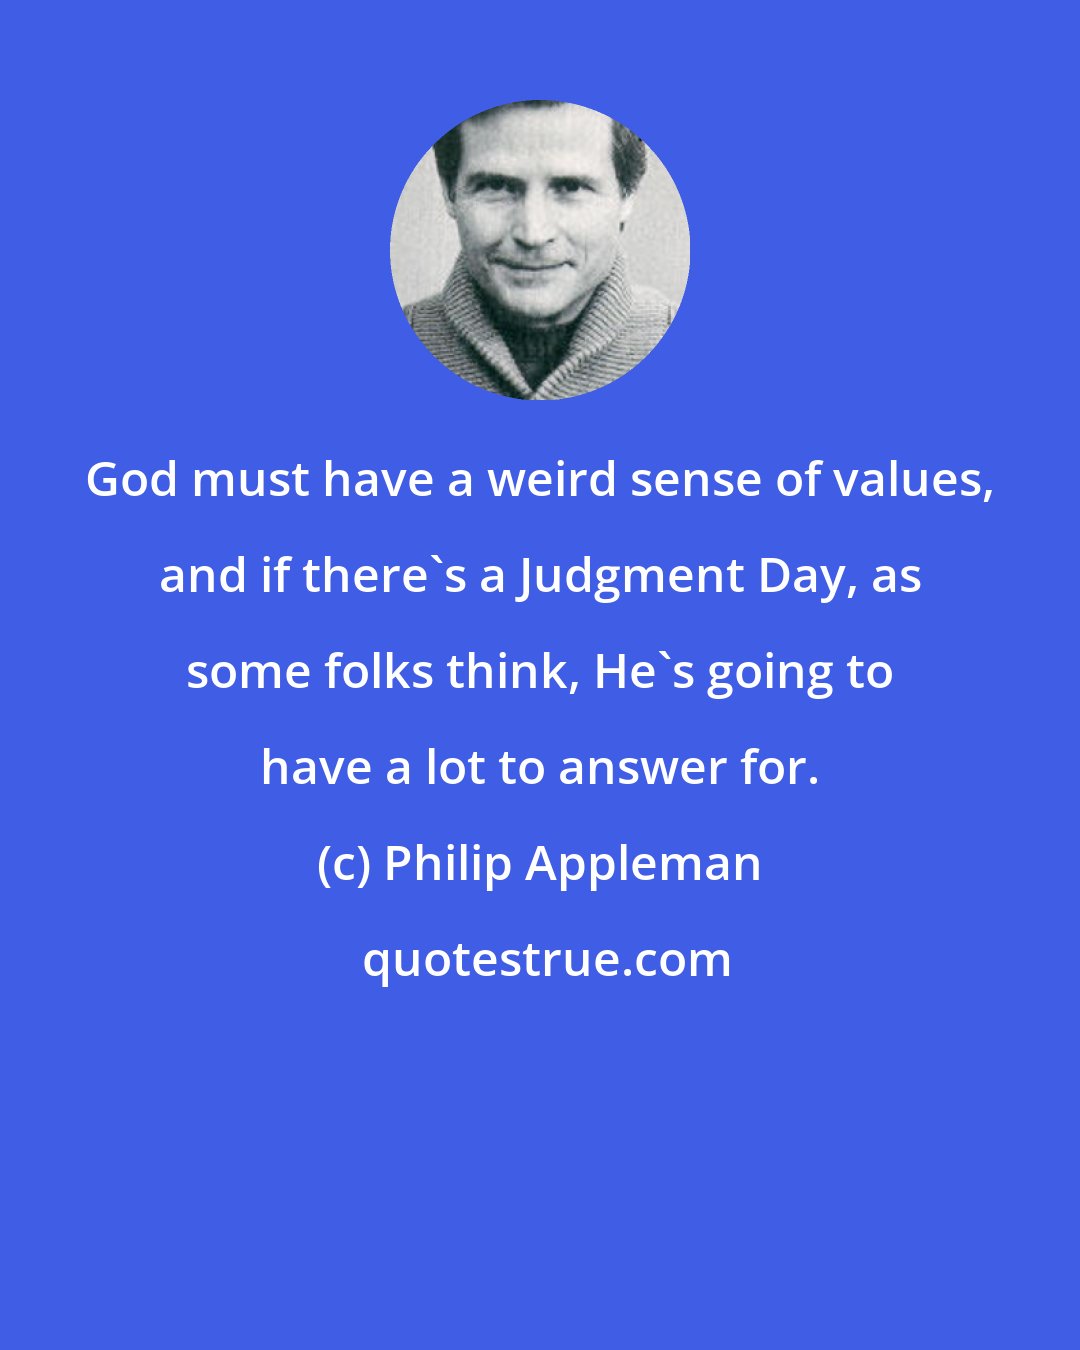 Philip Appleman: God must have a weird sense of values, and if there's a Judgment Day, as some folks think, He's going to have a lot to answer for.